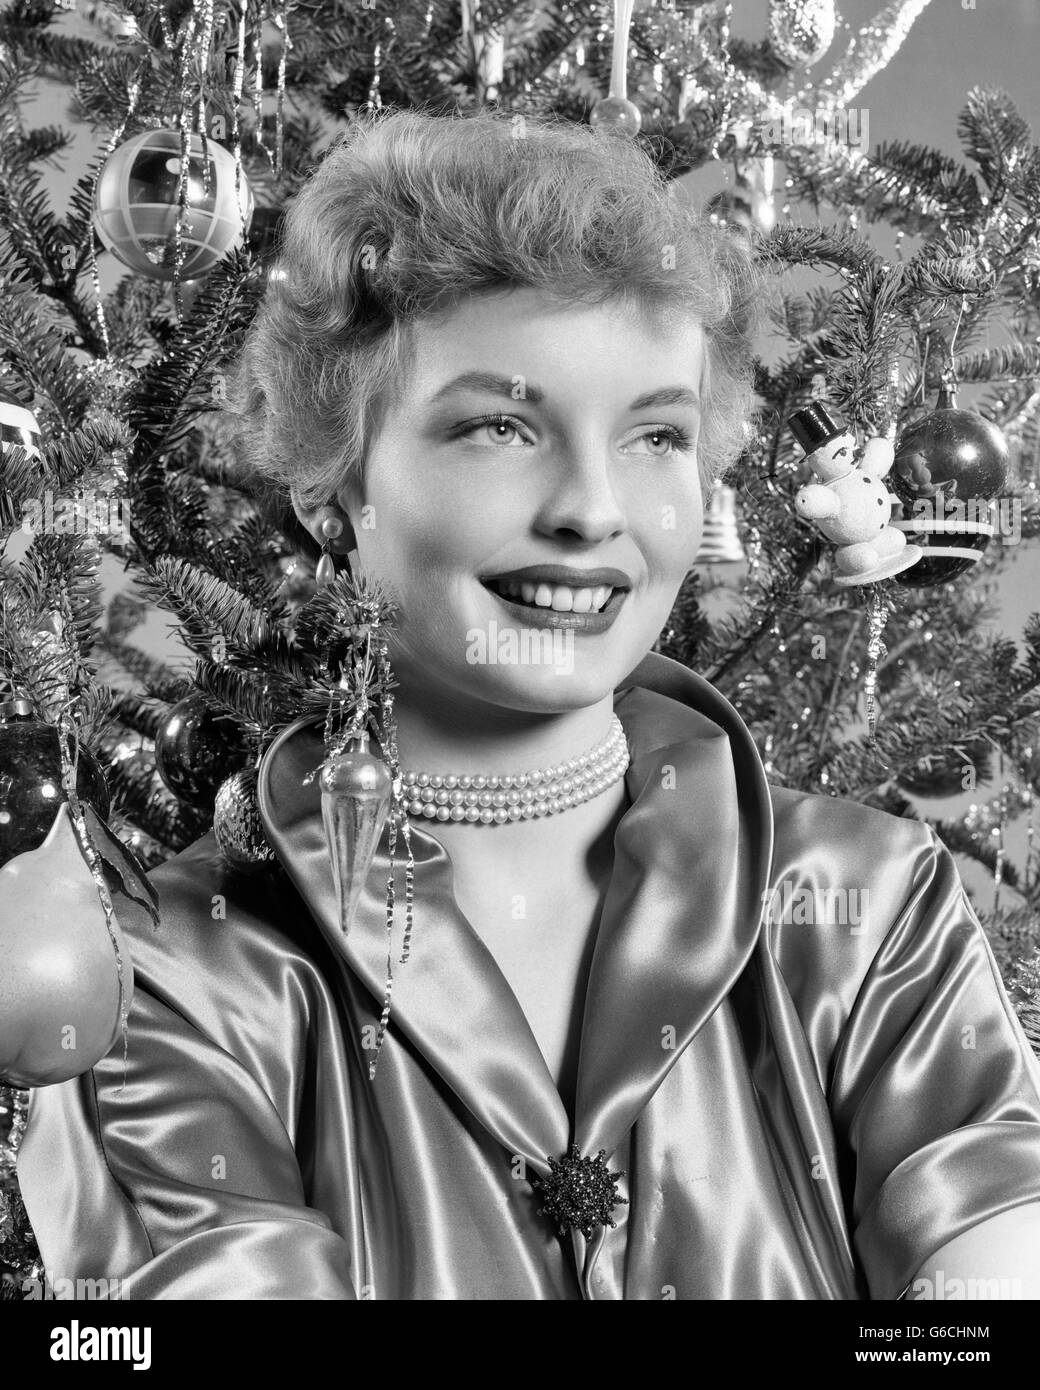 Années 1940 Années 1950 YOUNG SMILING WOMAN WITH CHRISTMAS TREE PORTANT CHEMISIER SATIN PEARL NECKLACE Banque D'Images